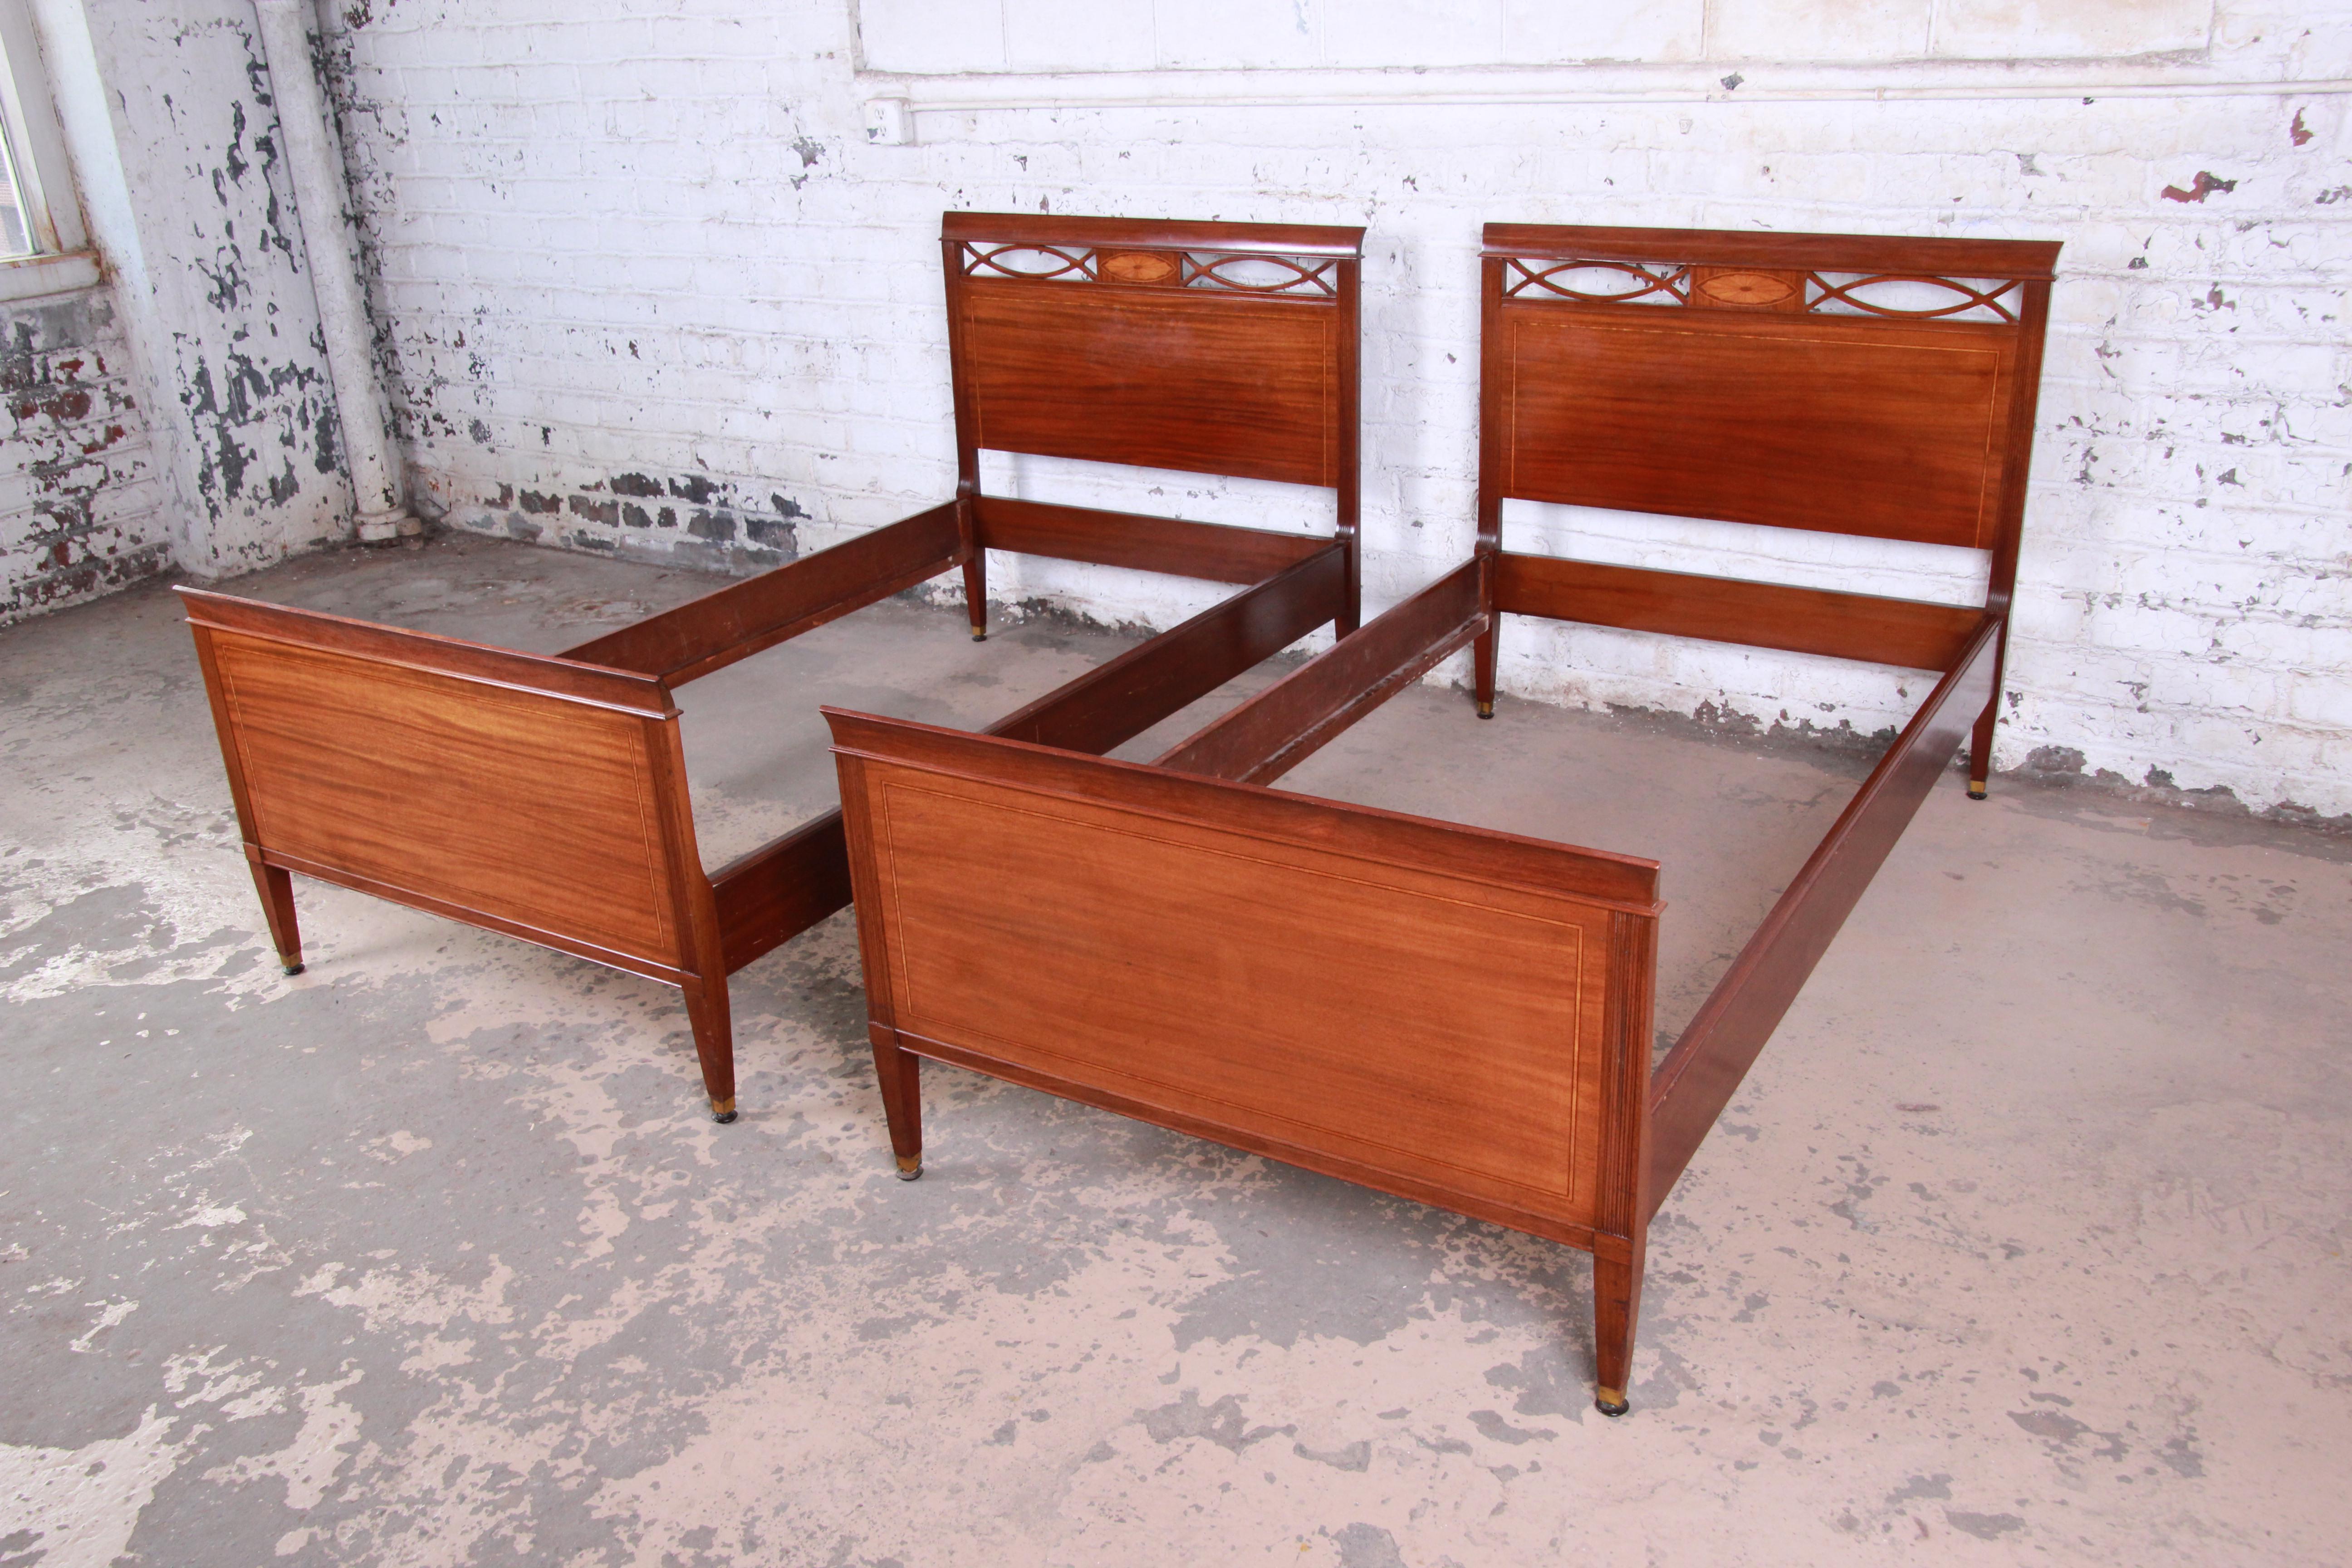 A gorgeous pair of vintage Federal style inlaid mahogany twin bed frames by Kindel Furniture of Grand Rapids. The beds feature beautiful mahogany wood grain with nice inlaid and carved wood details. Each retains the original Grand Rapids label. The